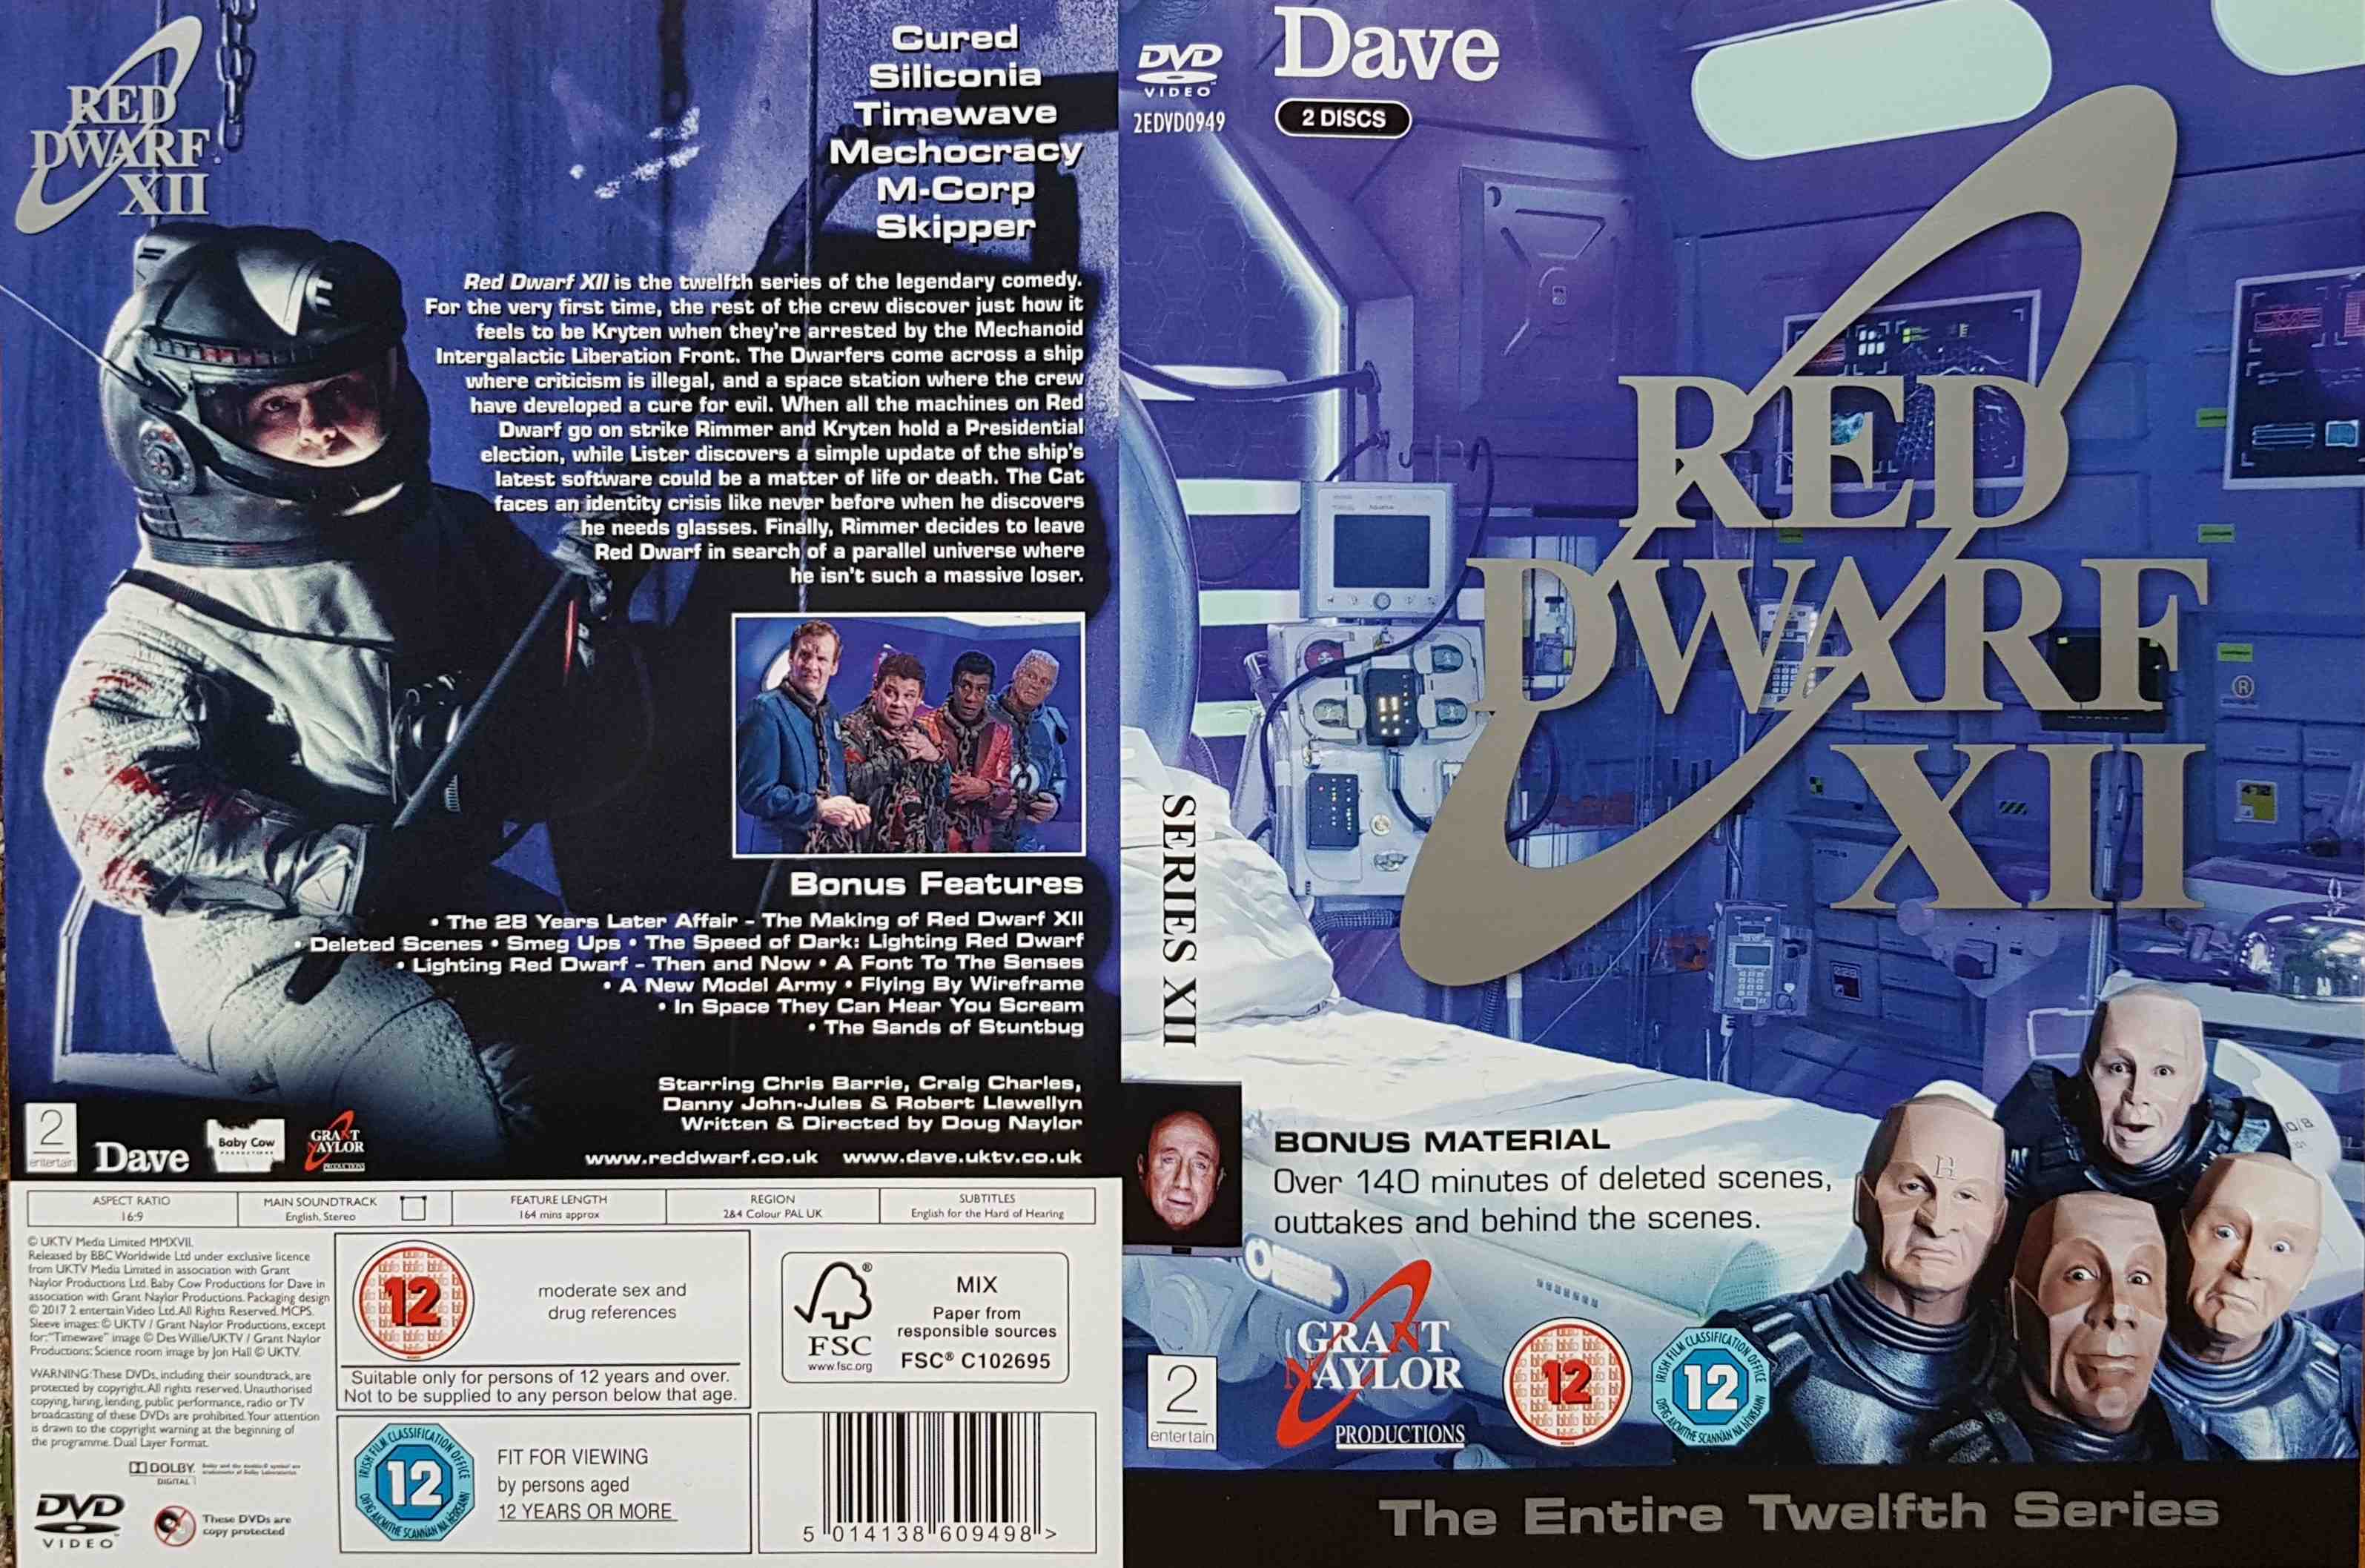 Picture of 2EDVD 0949 Red dwarf - Series XII by artist Doug Naylor from the BBC records and Tapes library